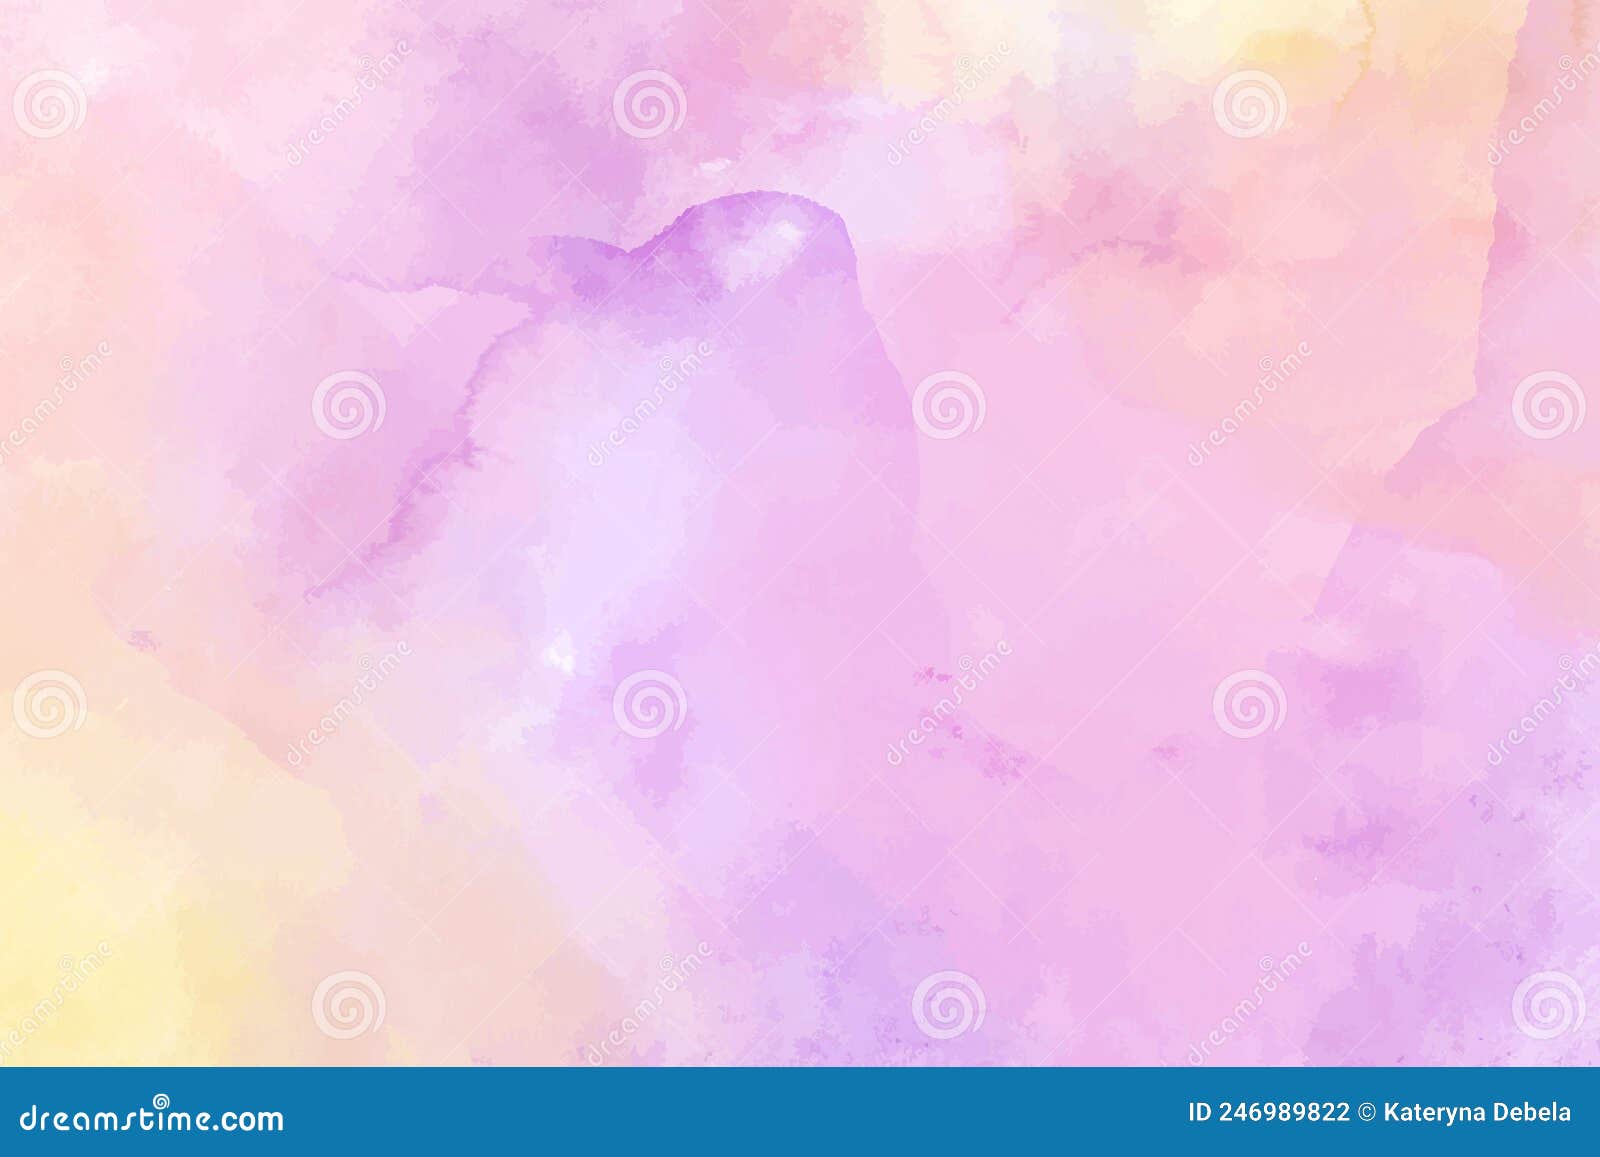 Purple, Pink Light Watercolor, Ink, Abstract Background Texture. Copy ...